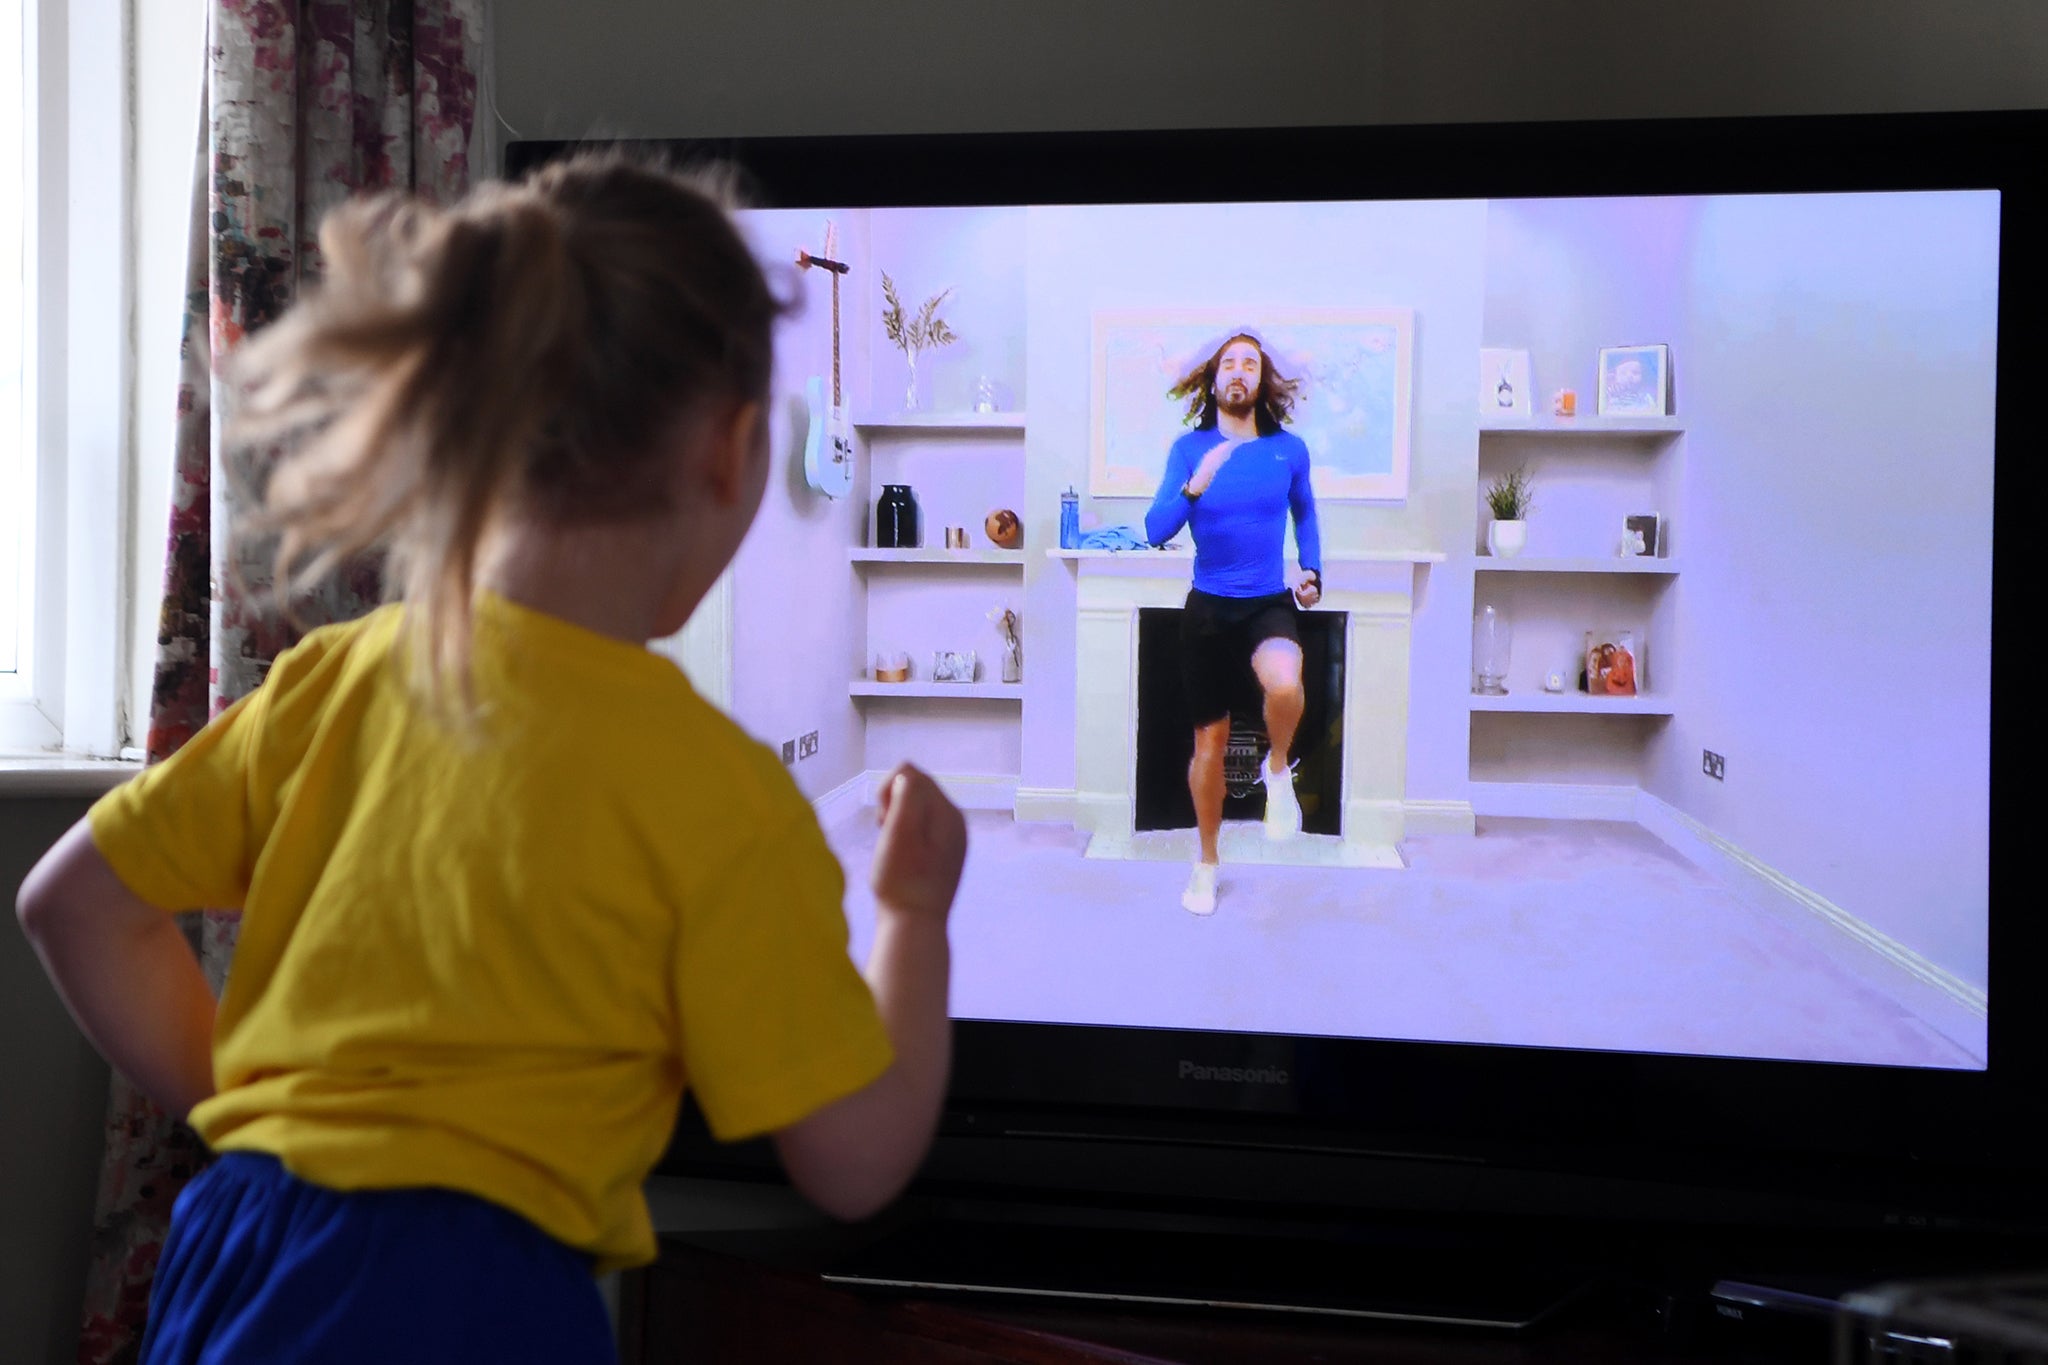 One thing parents don’t have to worry about is PE lessons – Joe Wicks’s free workouts are proving very popular with kids